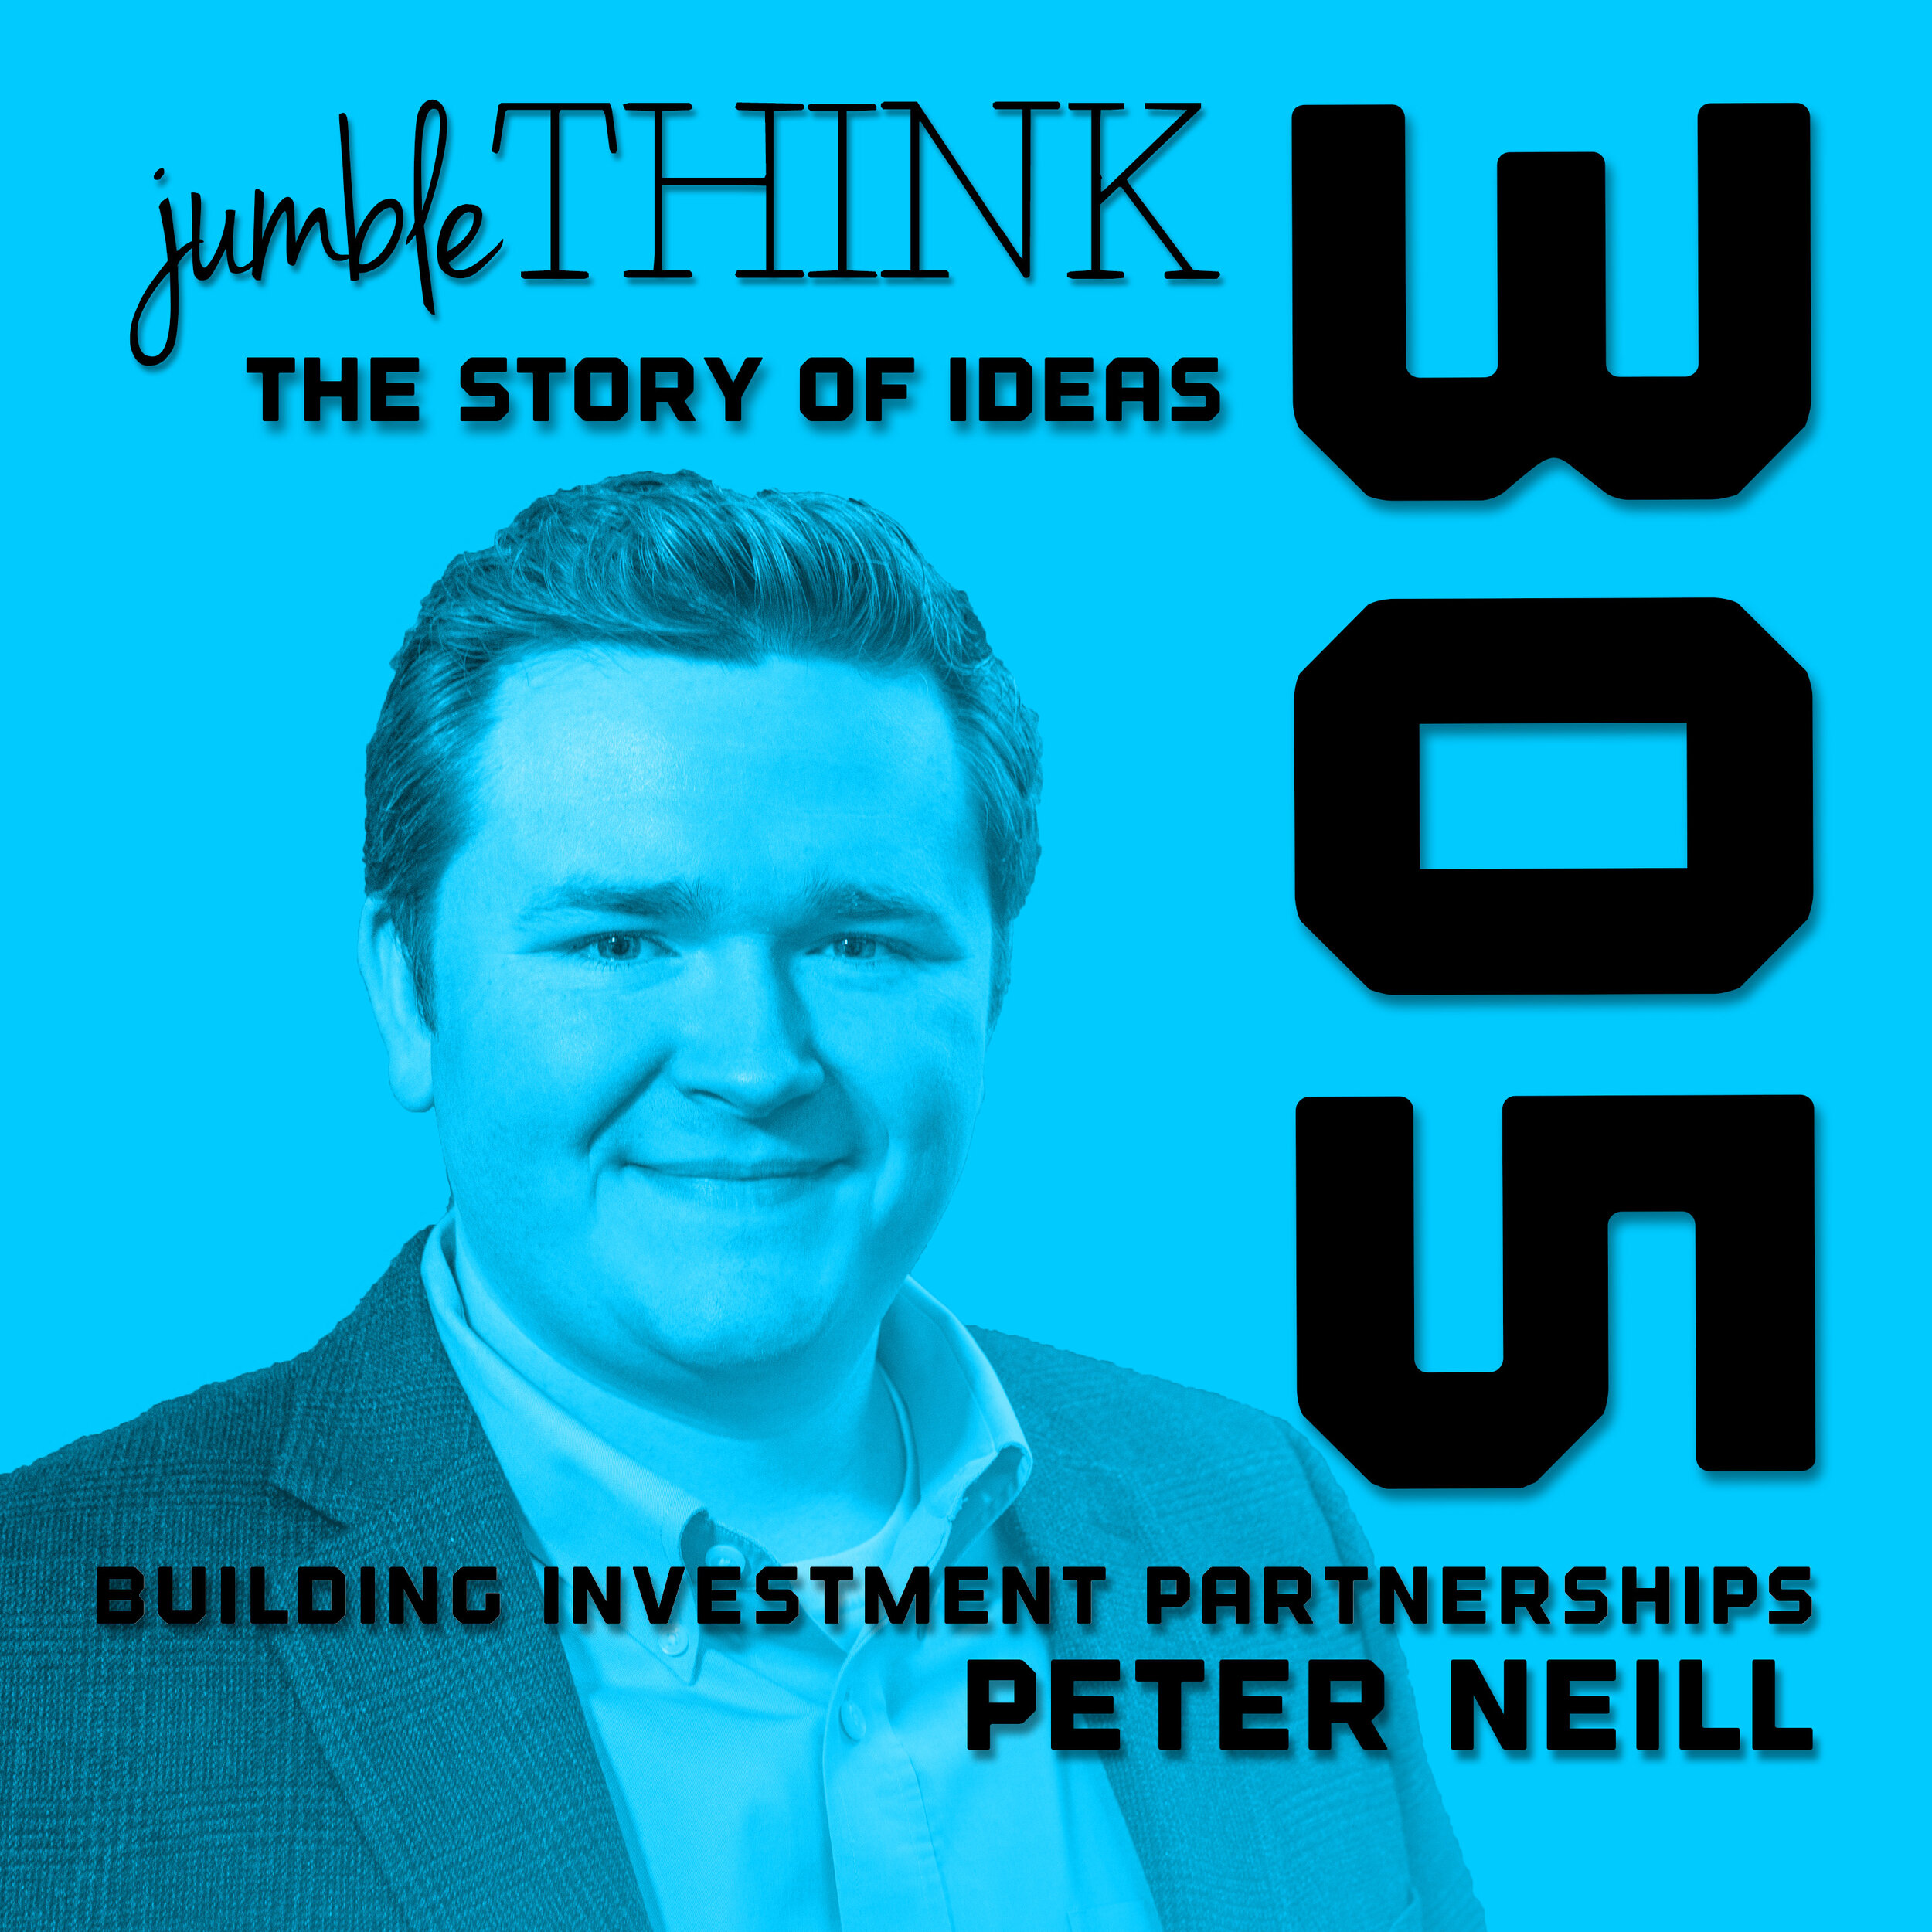 Building Investment Partnerships with Peter Neill